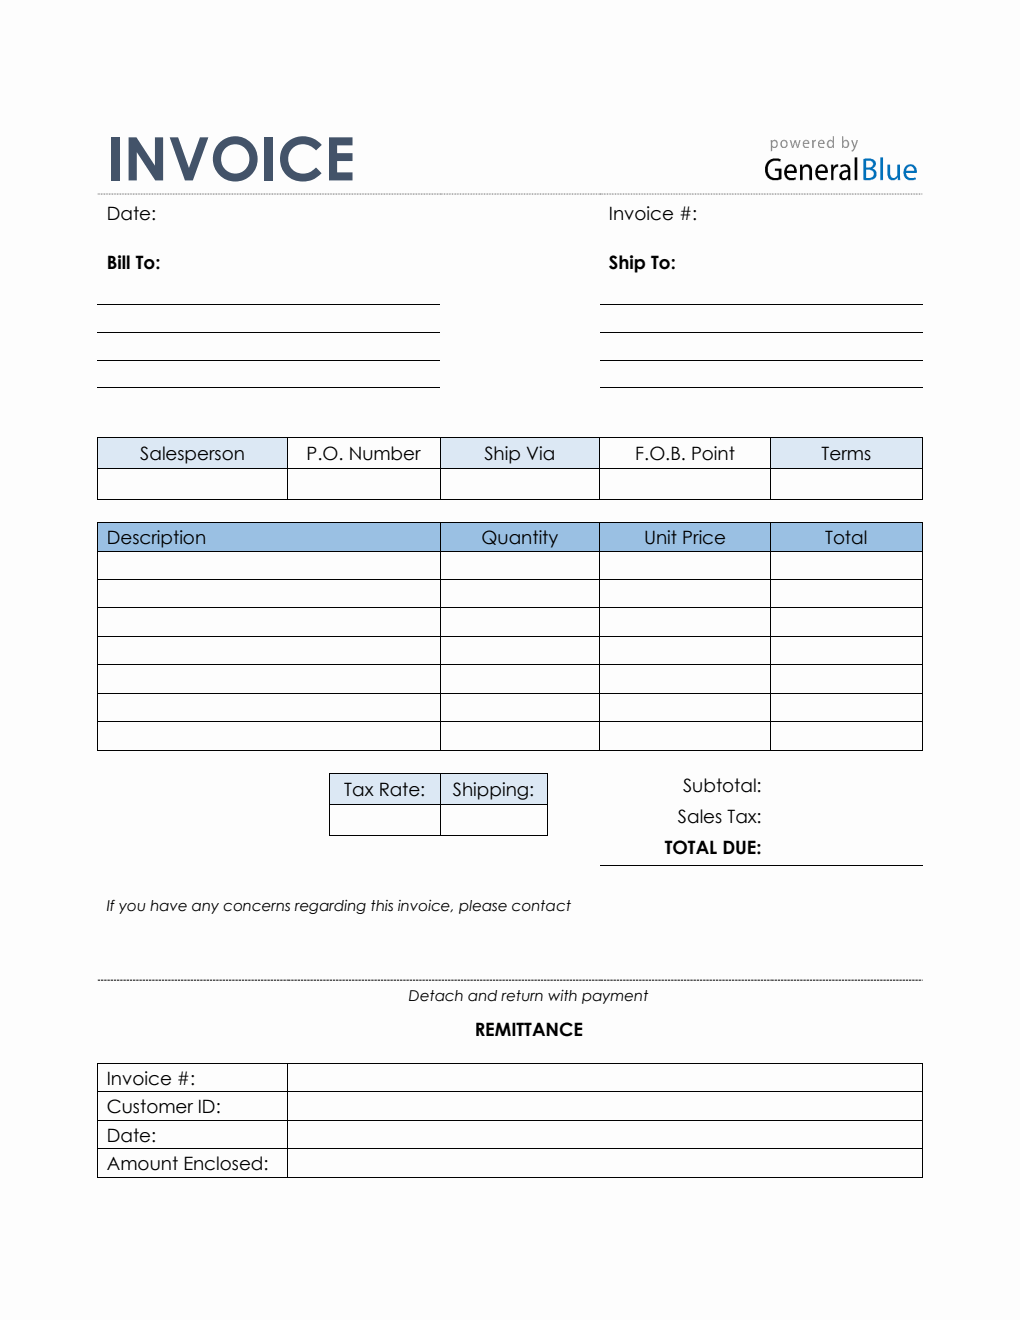 Sales Invoice with Remittance Slip in PDF (Colorful)